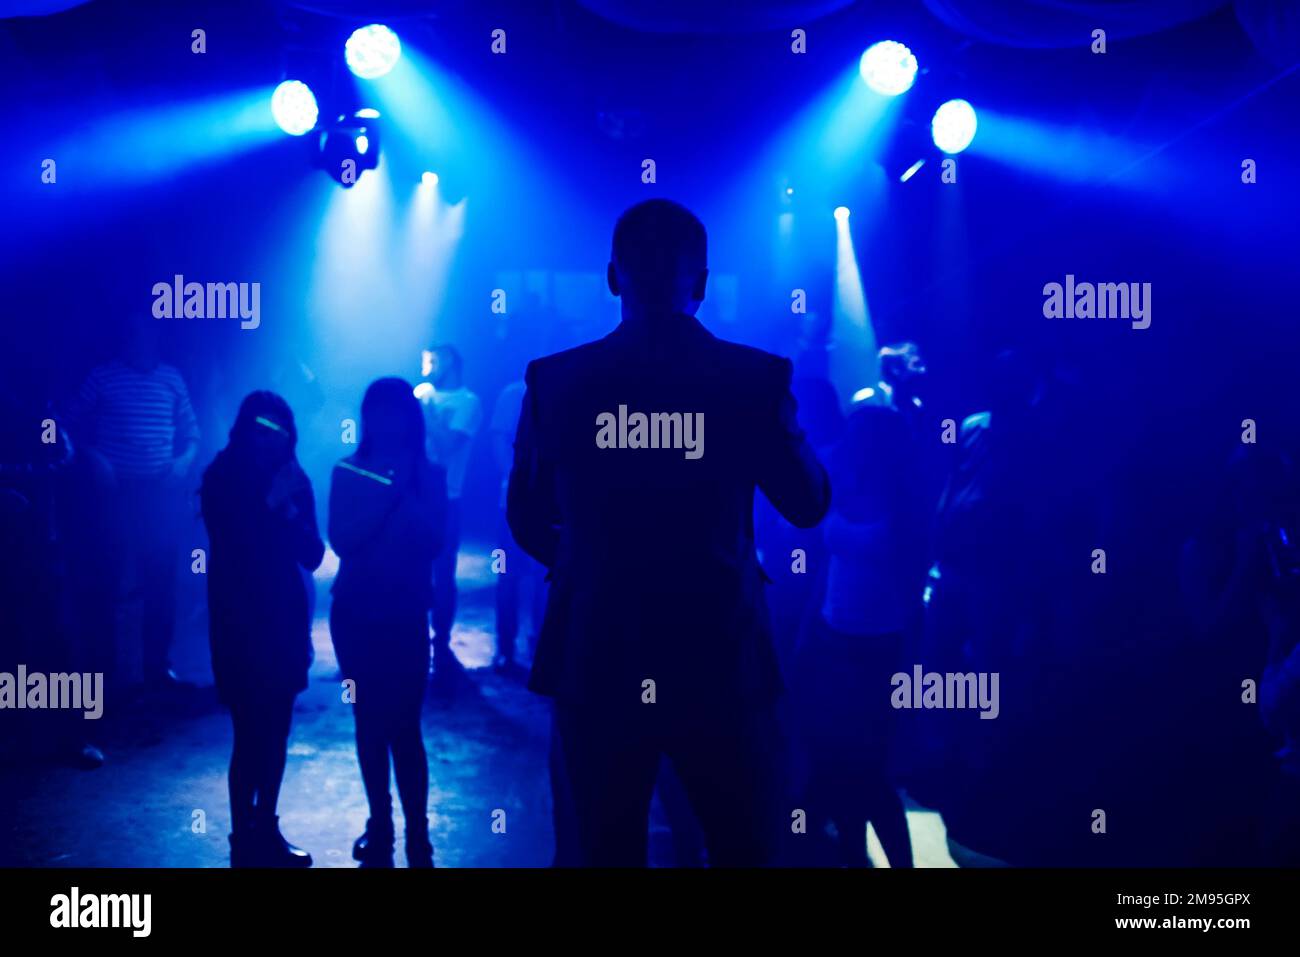 silhouette leading into the nightclub scene with dancing on the dance floor people at the event Stock Photo